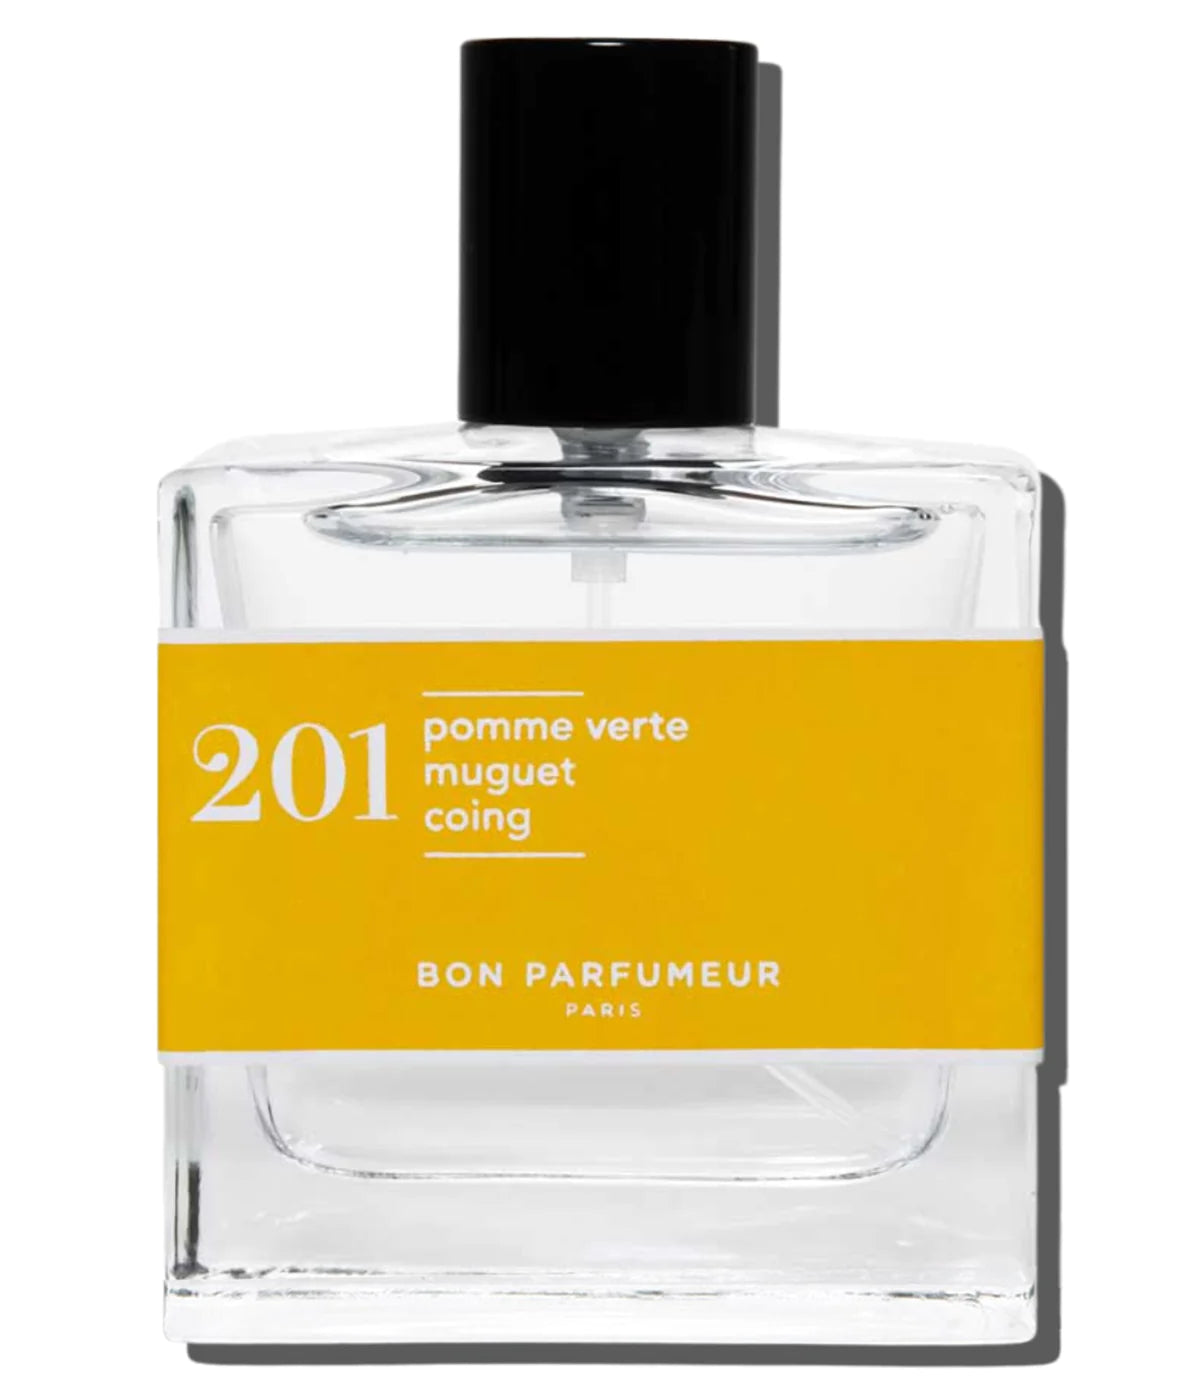 Bon Parfumeur, 201, Fruity, Green Apple, Lily Of The Valley, Quince